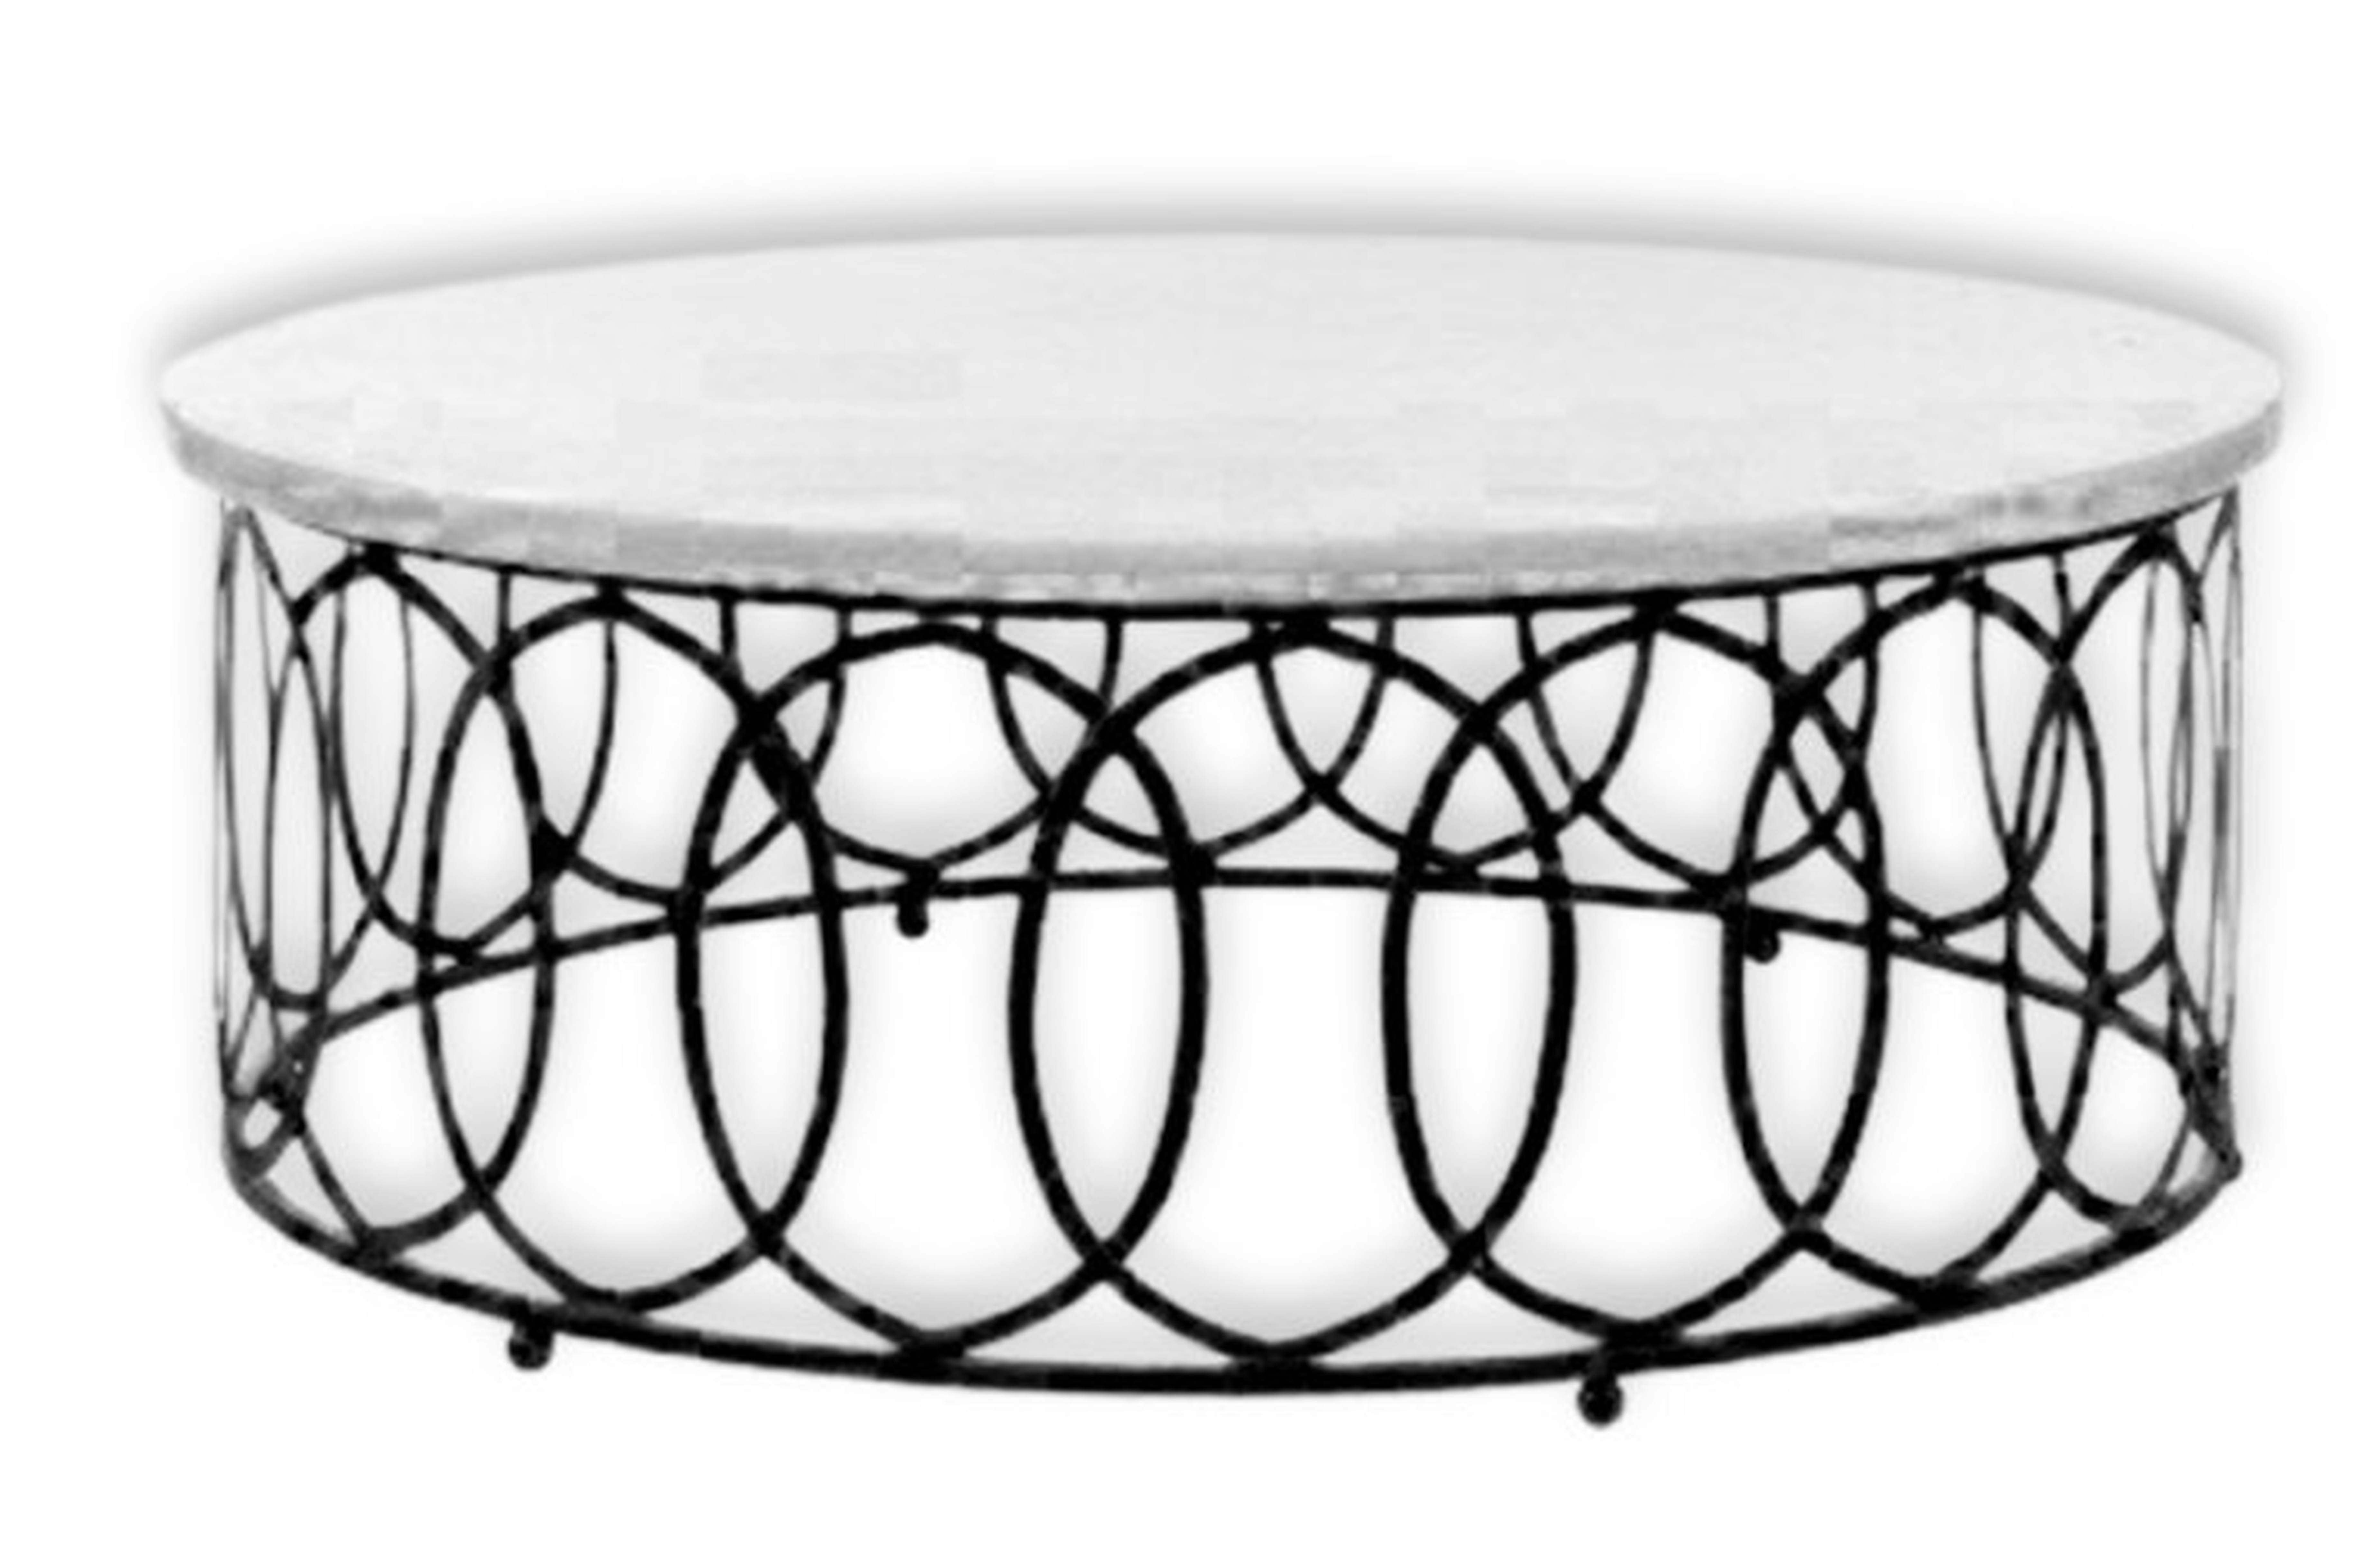 New Orleans coffee table - Perigold